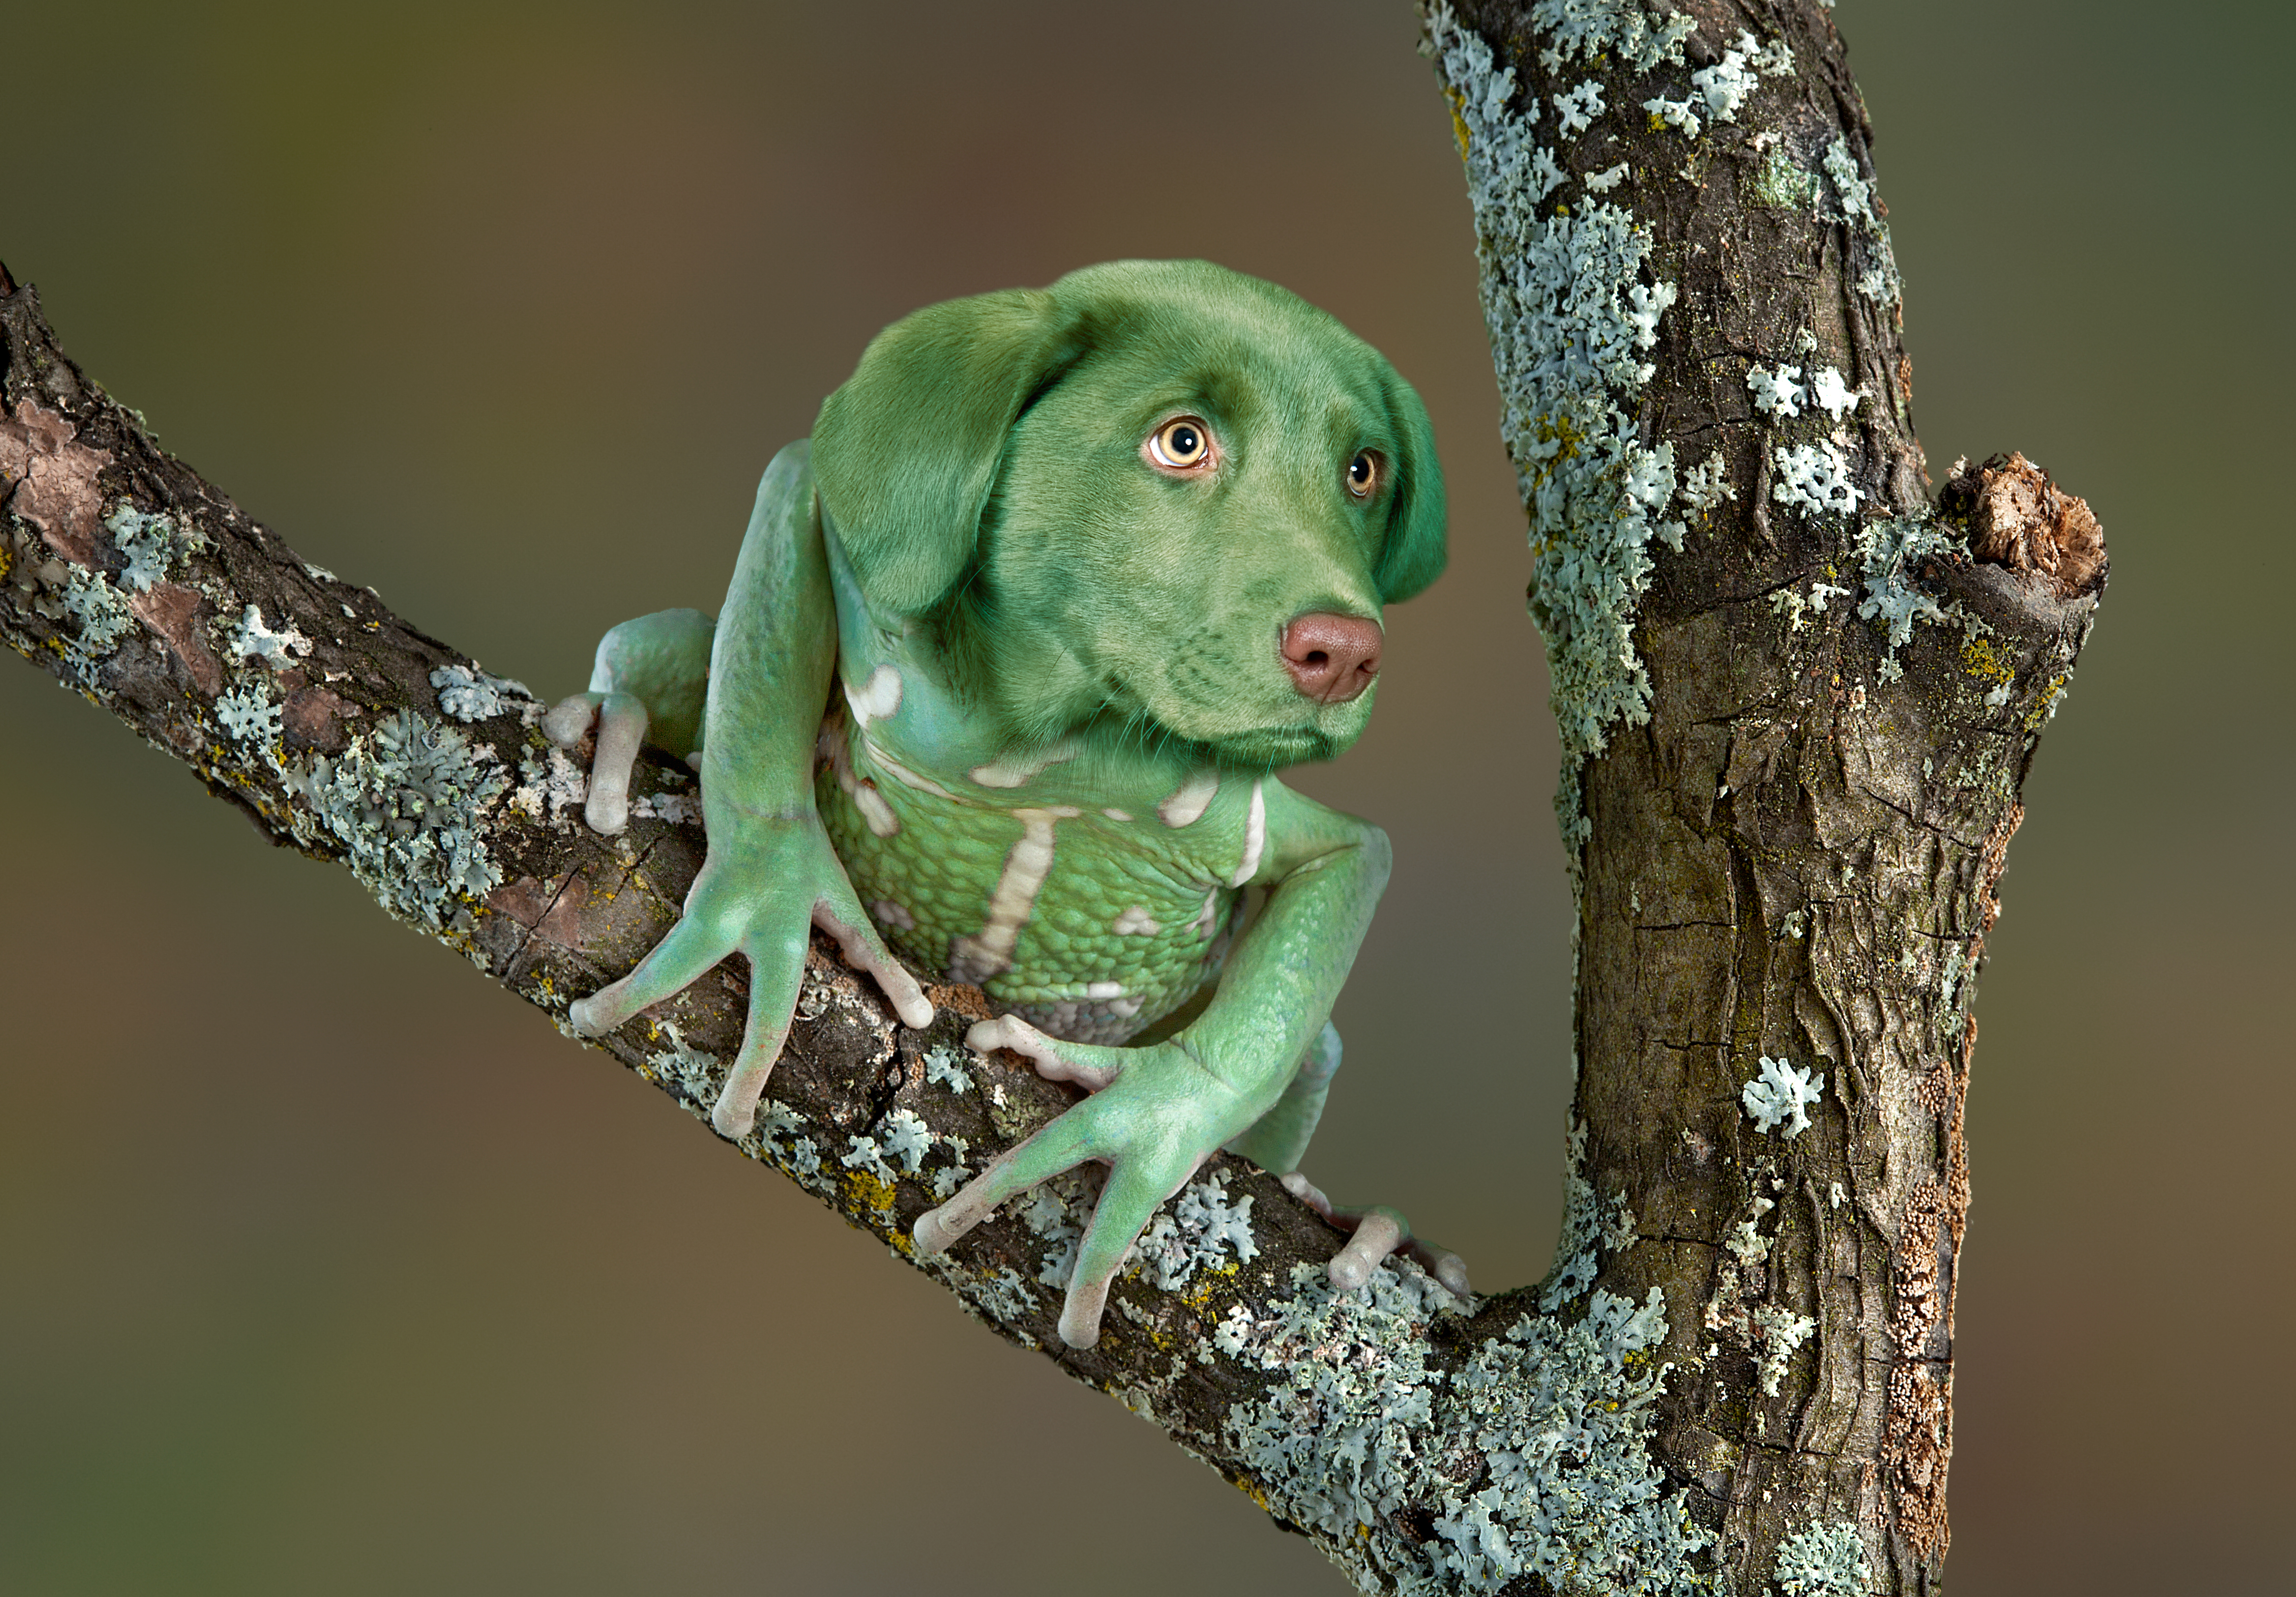 6 Animal Hybrids So Crazy They Don't Even Seem Real - The Rainforest Site  News